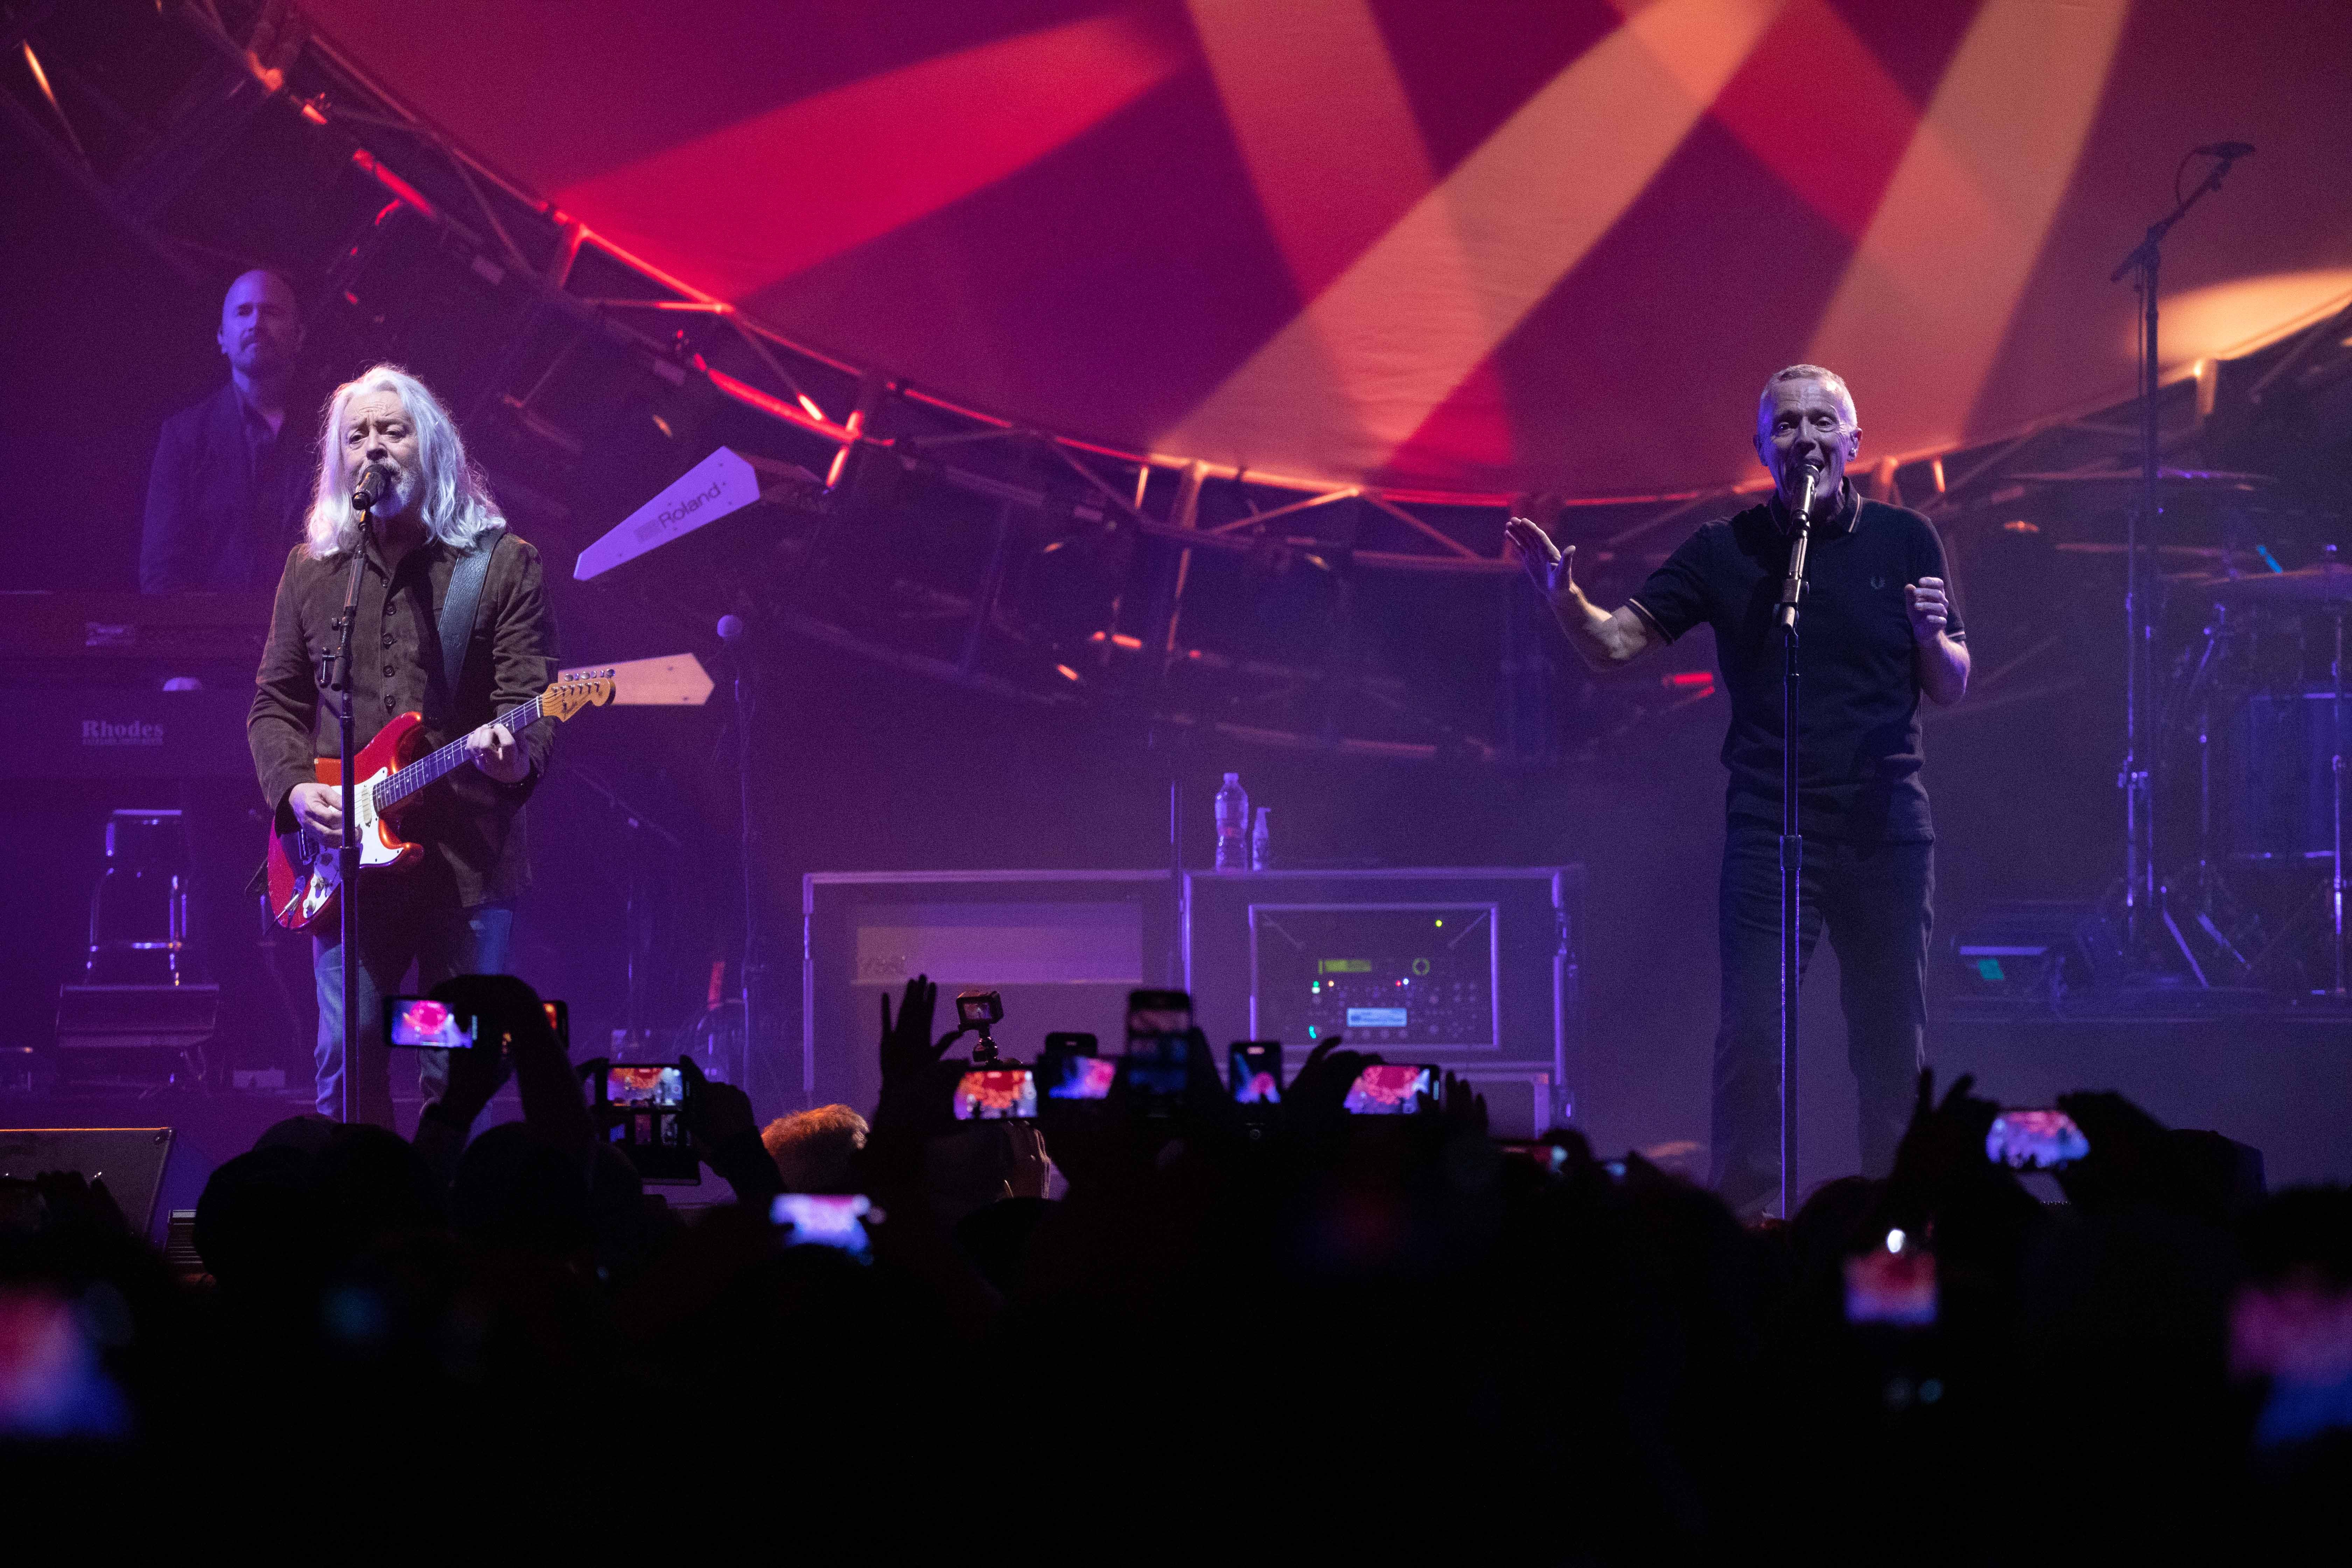 Live Review: A total love fest as Tears for Fears return to